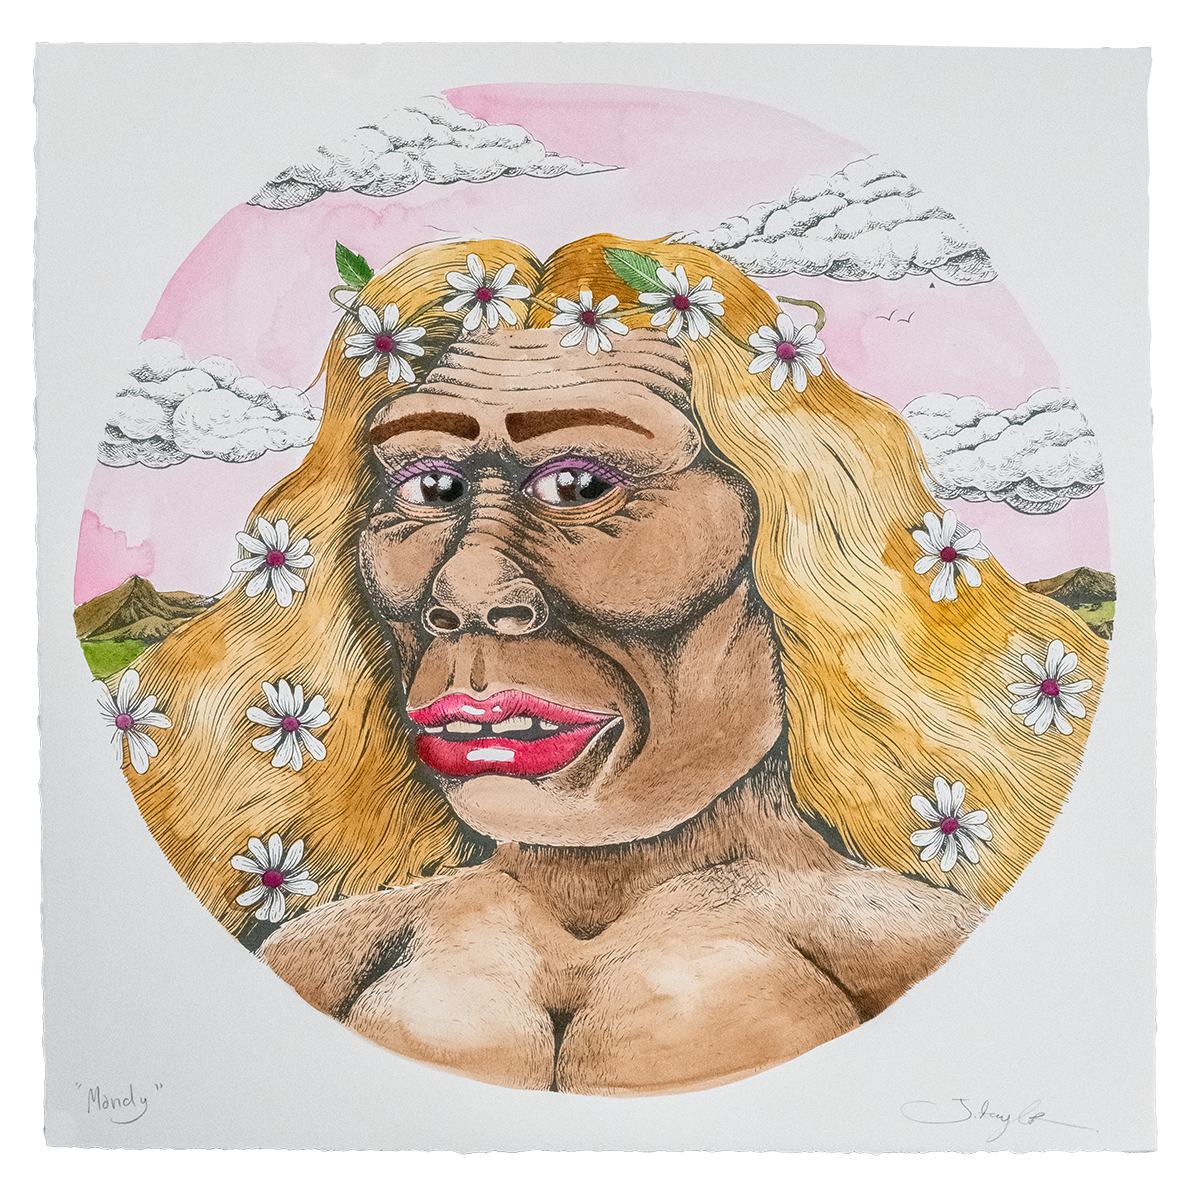 Neanderthal (Mandy) Hand-finished with Watercolours